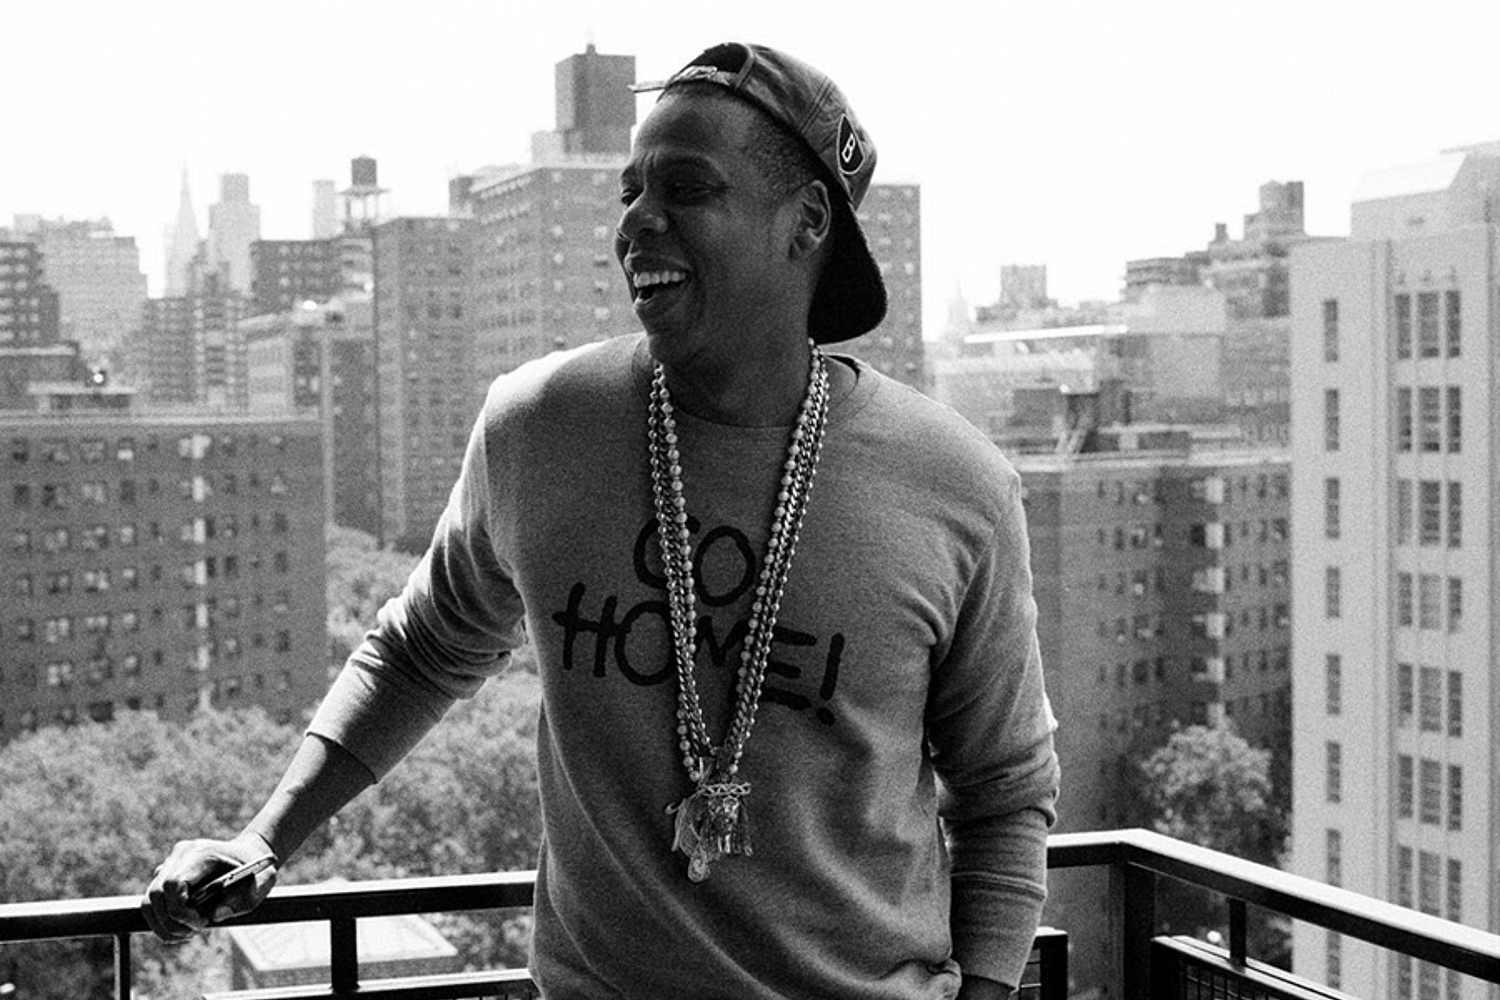 Jay-Z’s Tidal streaming service ropes in Kanye, Beyoncé, Jack White and more for re-launch